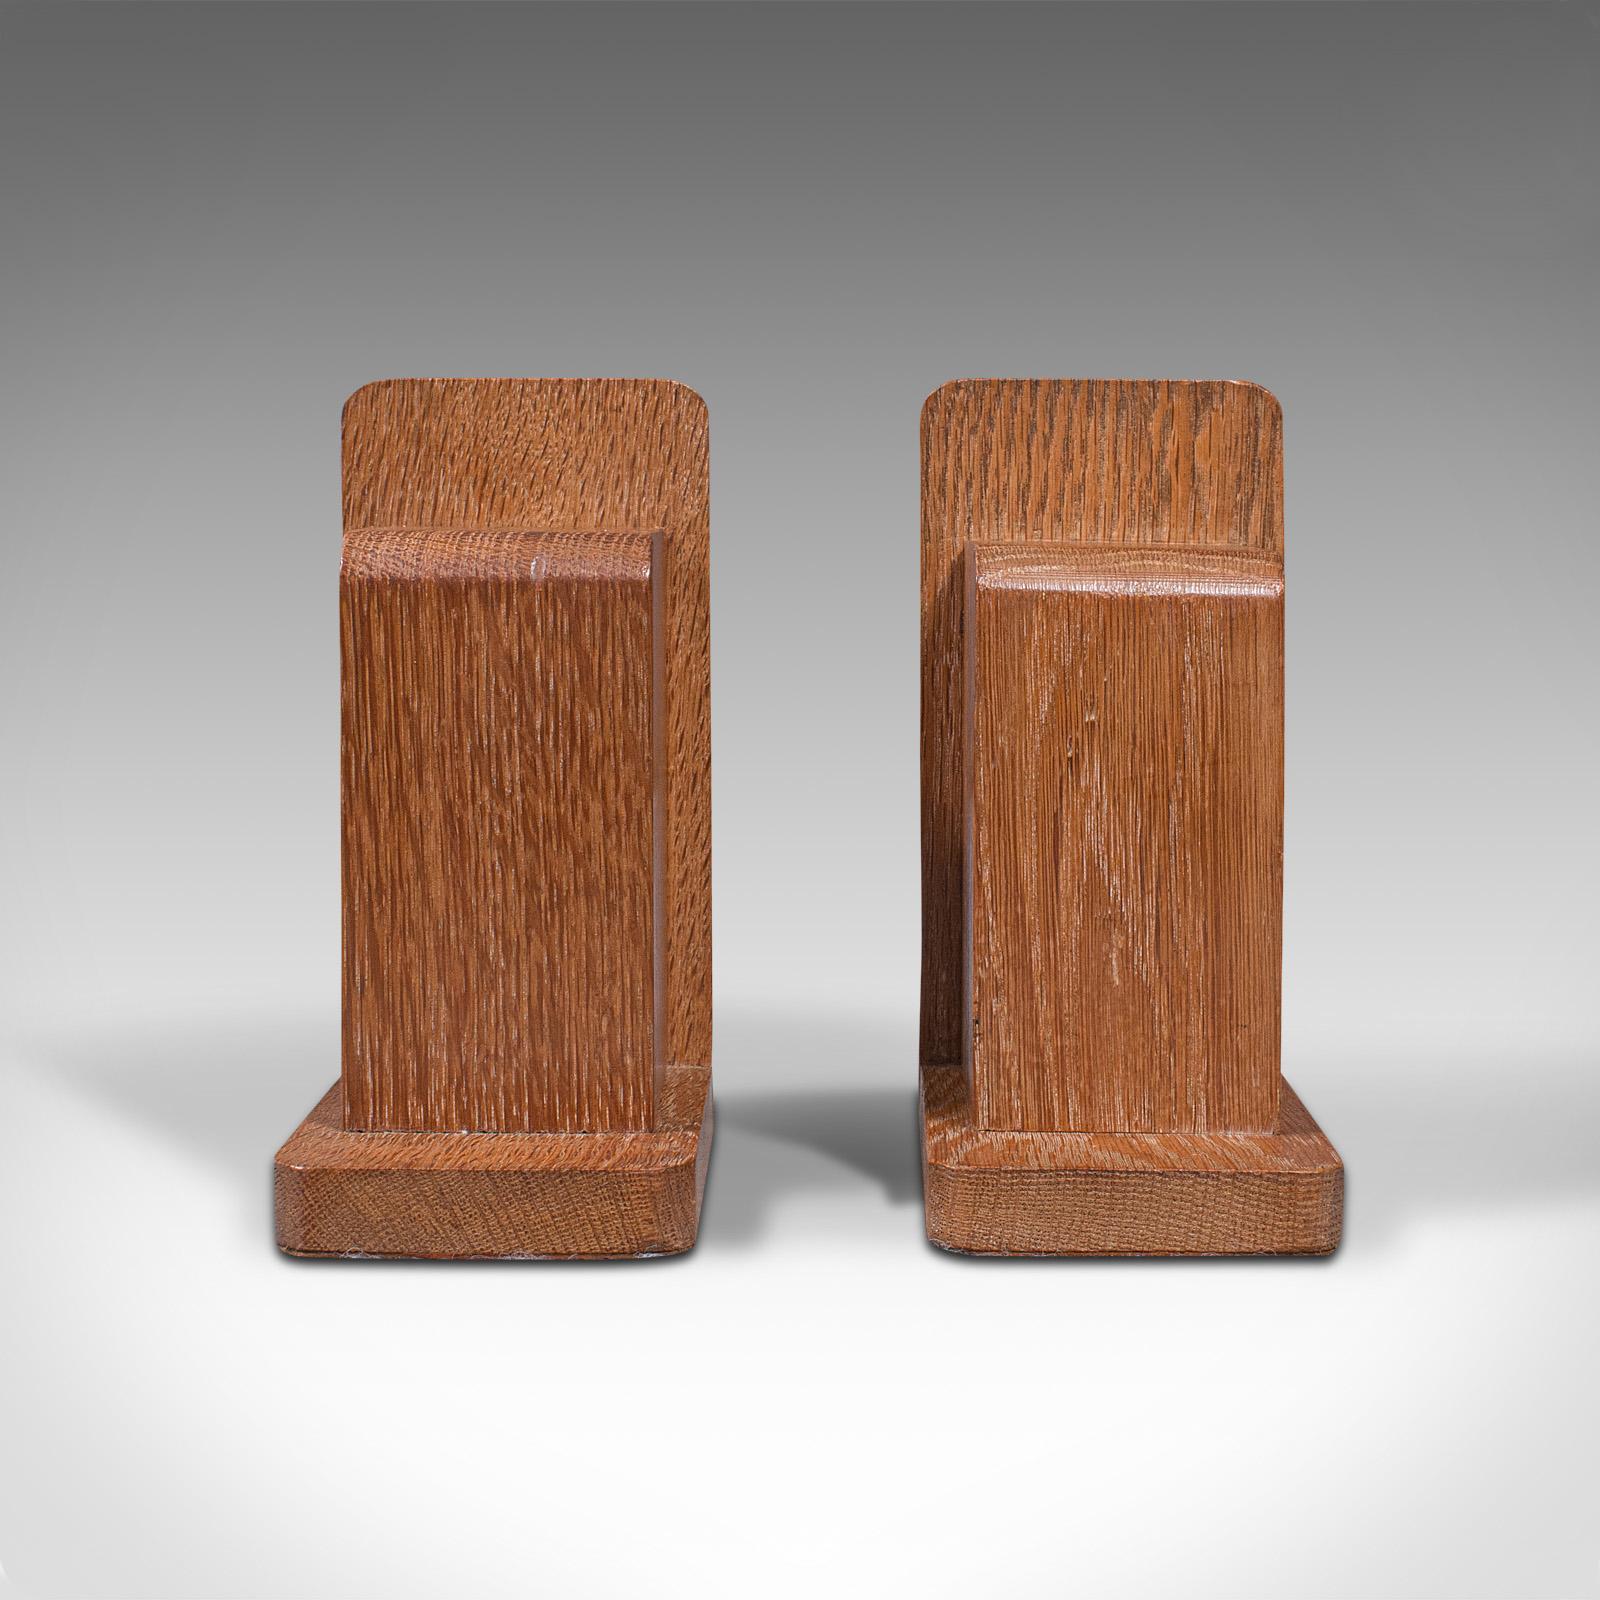 wooden bookends uk